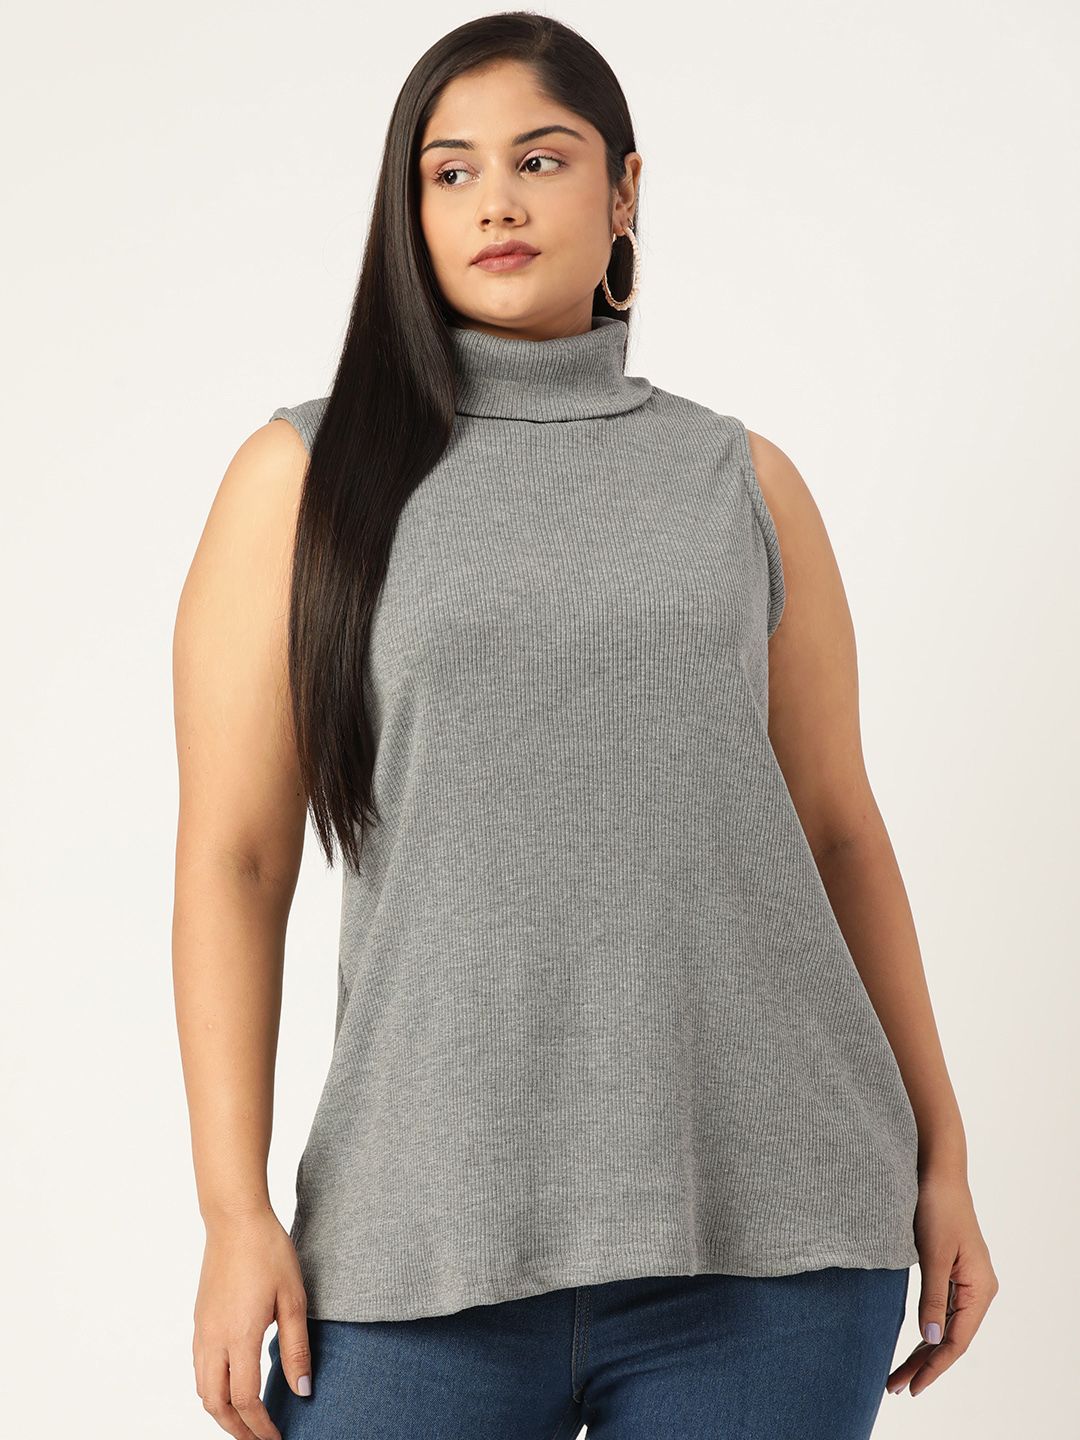 theRebelinme Grey Solid Plus Size Cotton Top Price in India